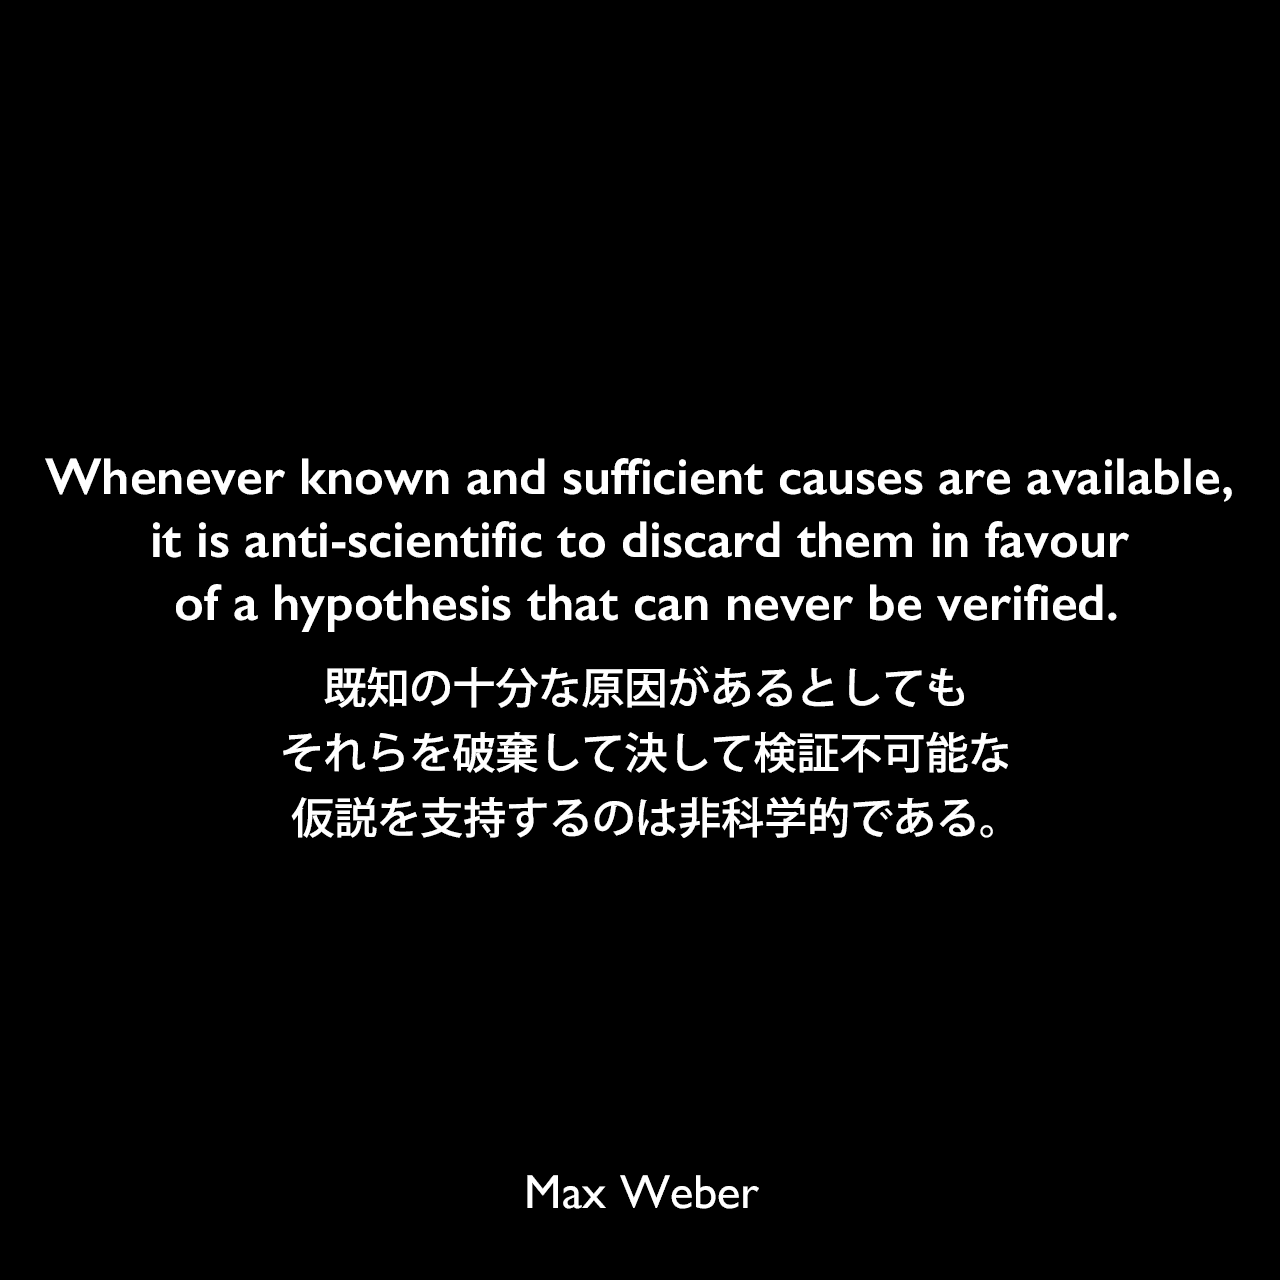 Whenever known and sufficient causes are available, it is anti-scientific to discard them in favour of a hypothesis that can never be verified.既知の十分な原因があるとしても、それらを破棄して決して検証不可能な仮説を支持するのは非科学的である。Max Weber